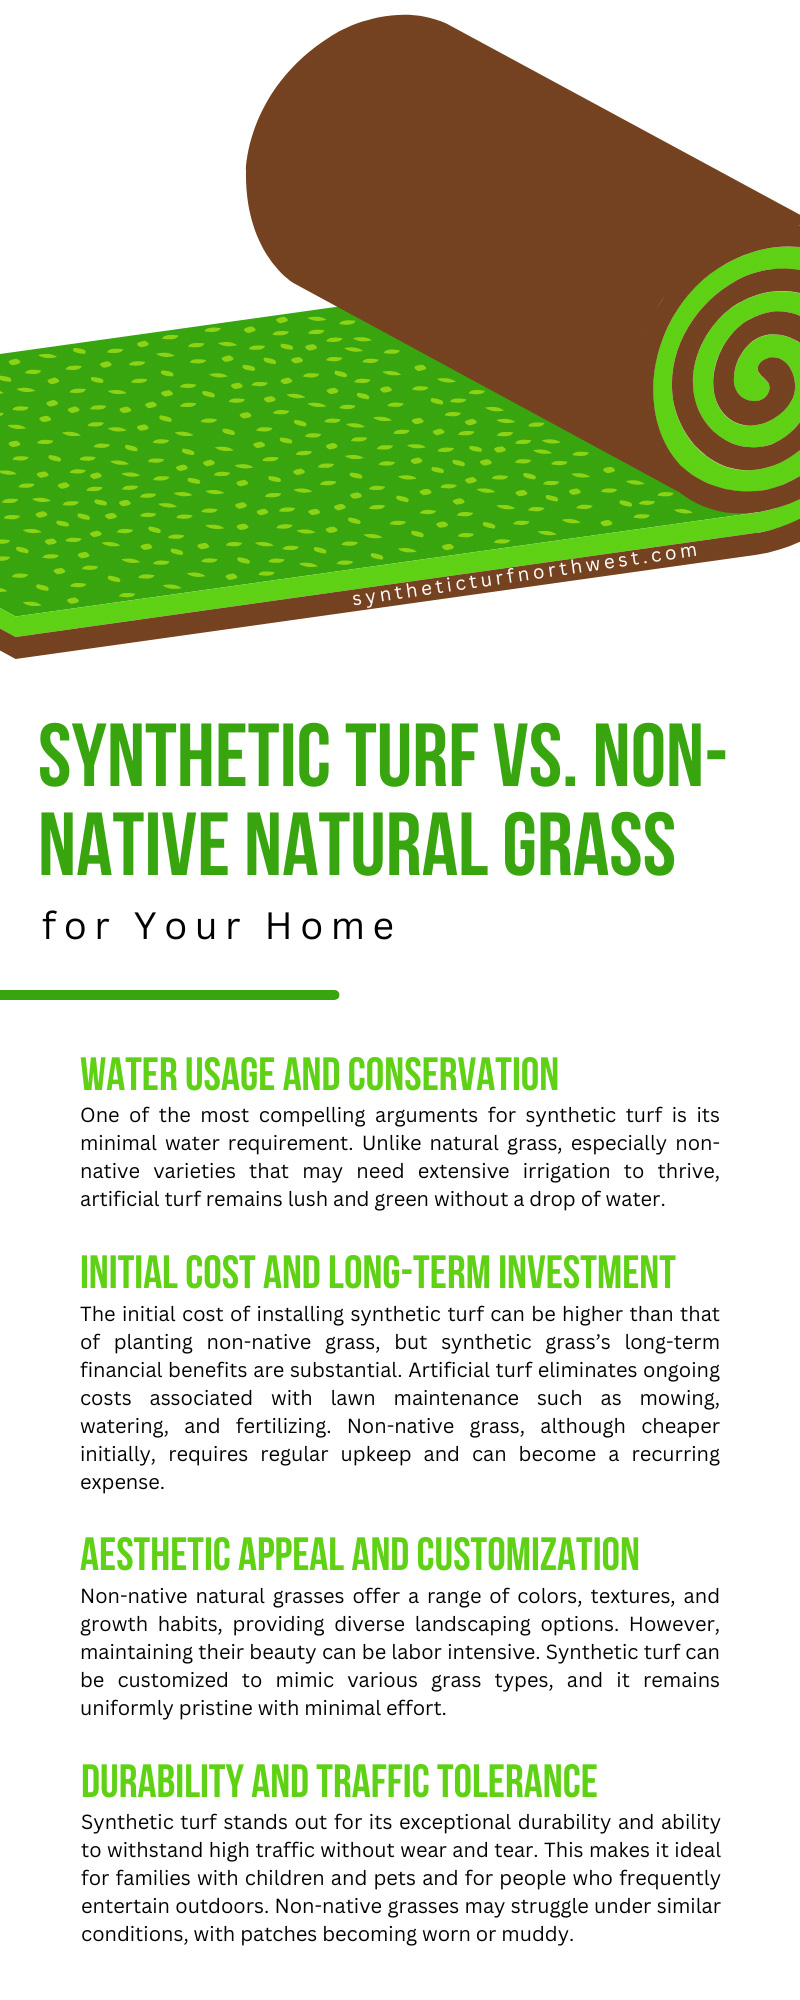 Synthetic Turf vs. Non-Native Natural Grass for Your Home